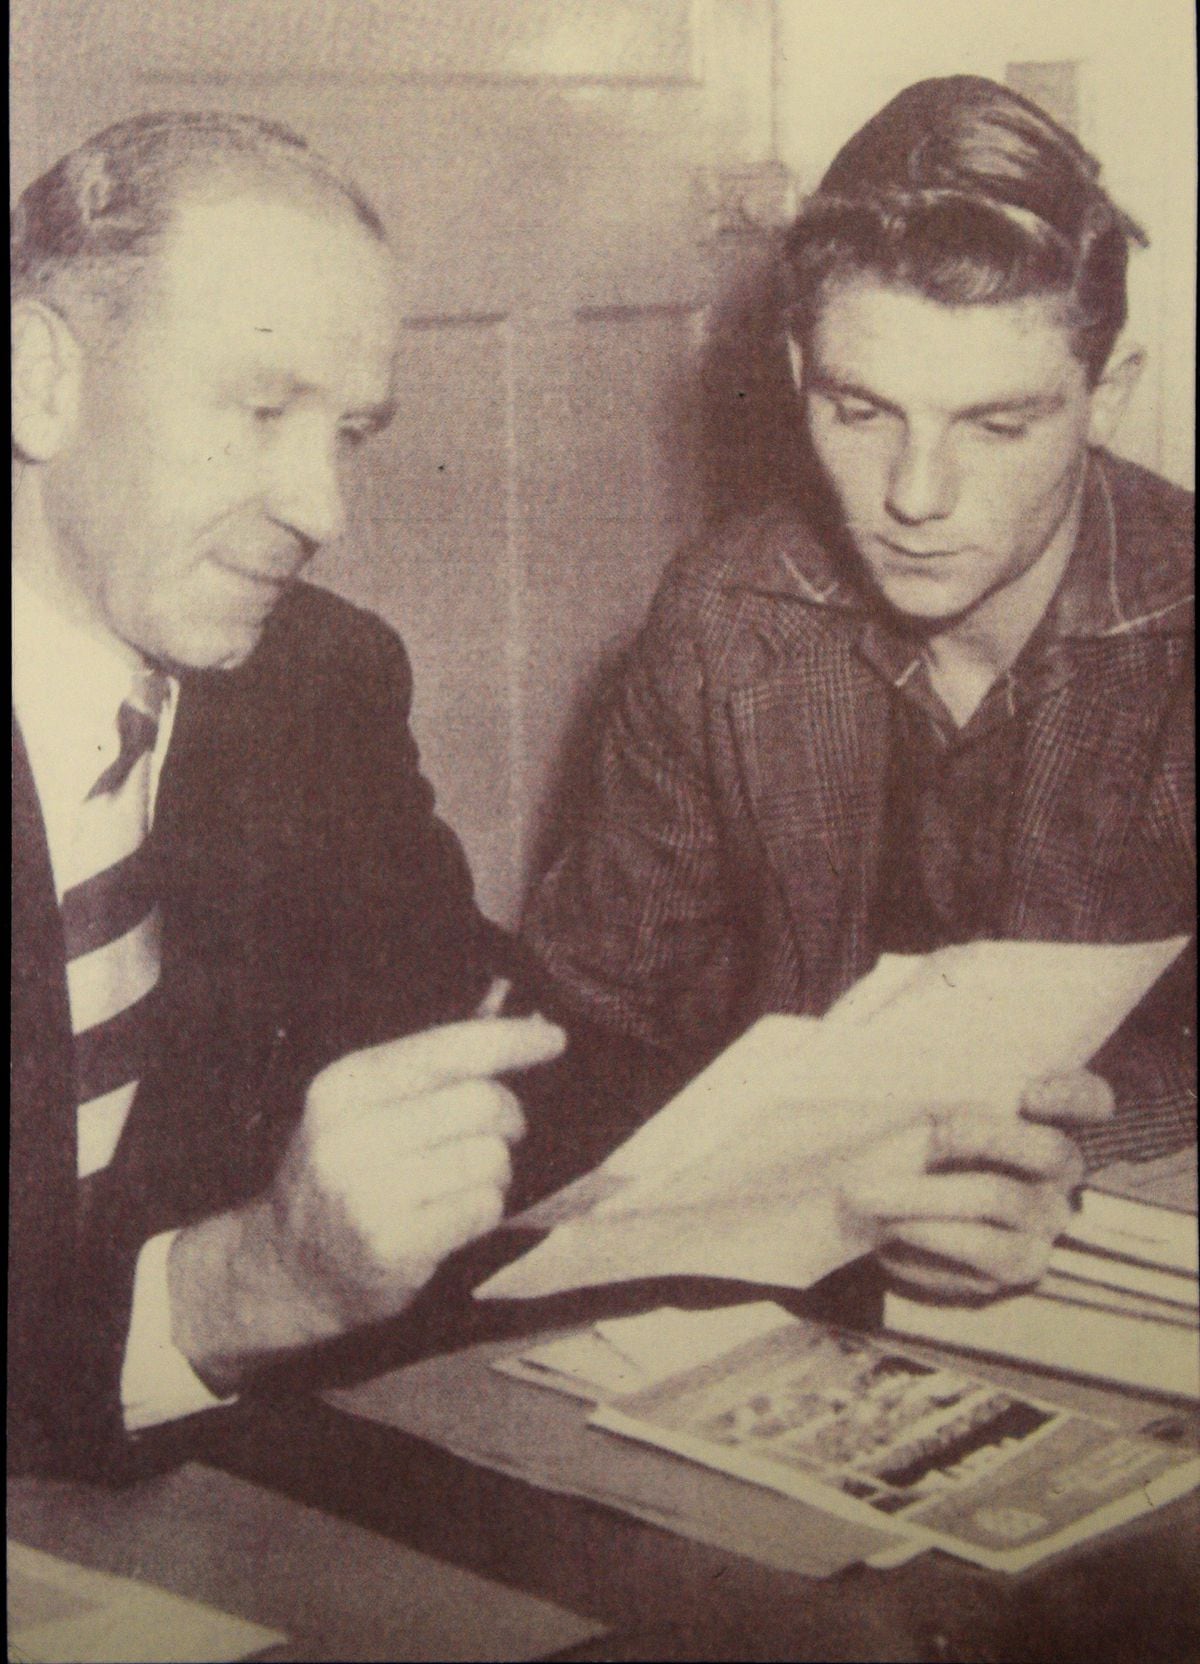 Duncan signing for Manchester United with manager Matt Busby